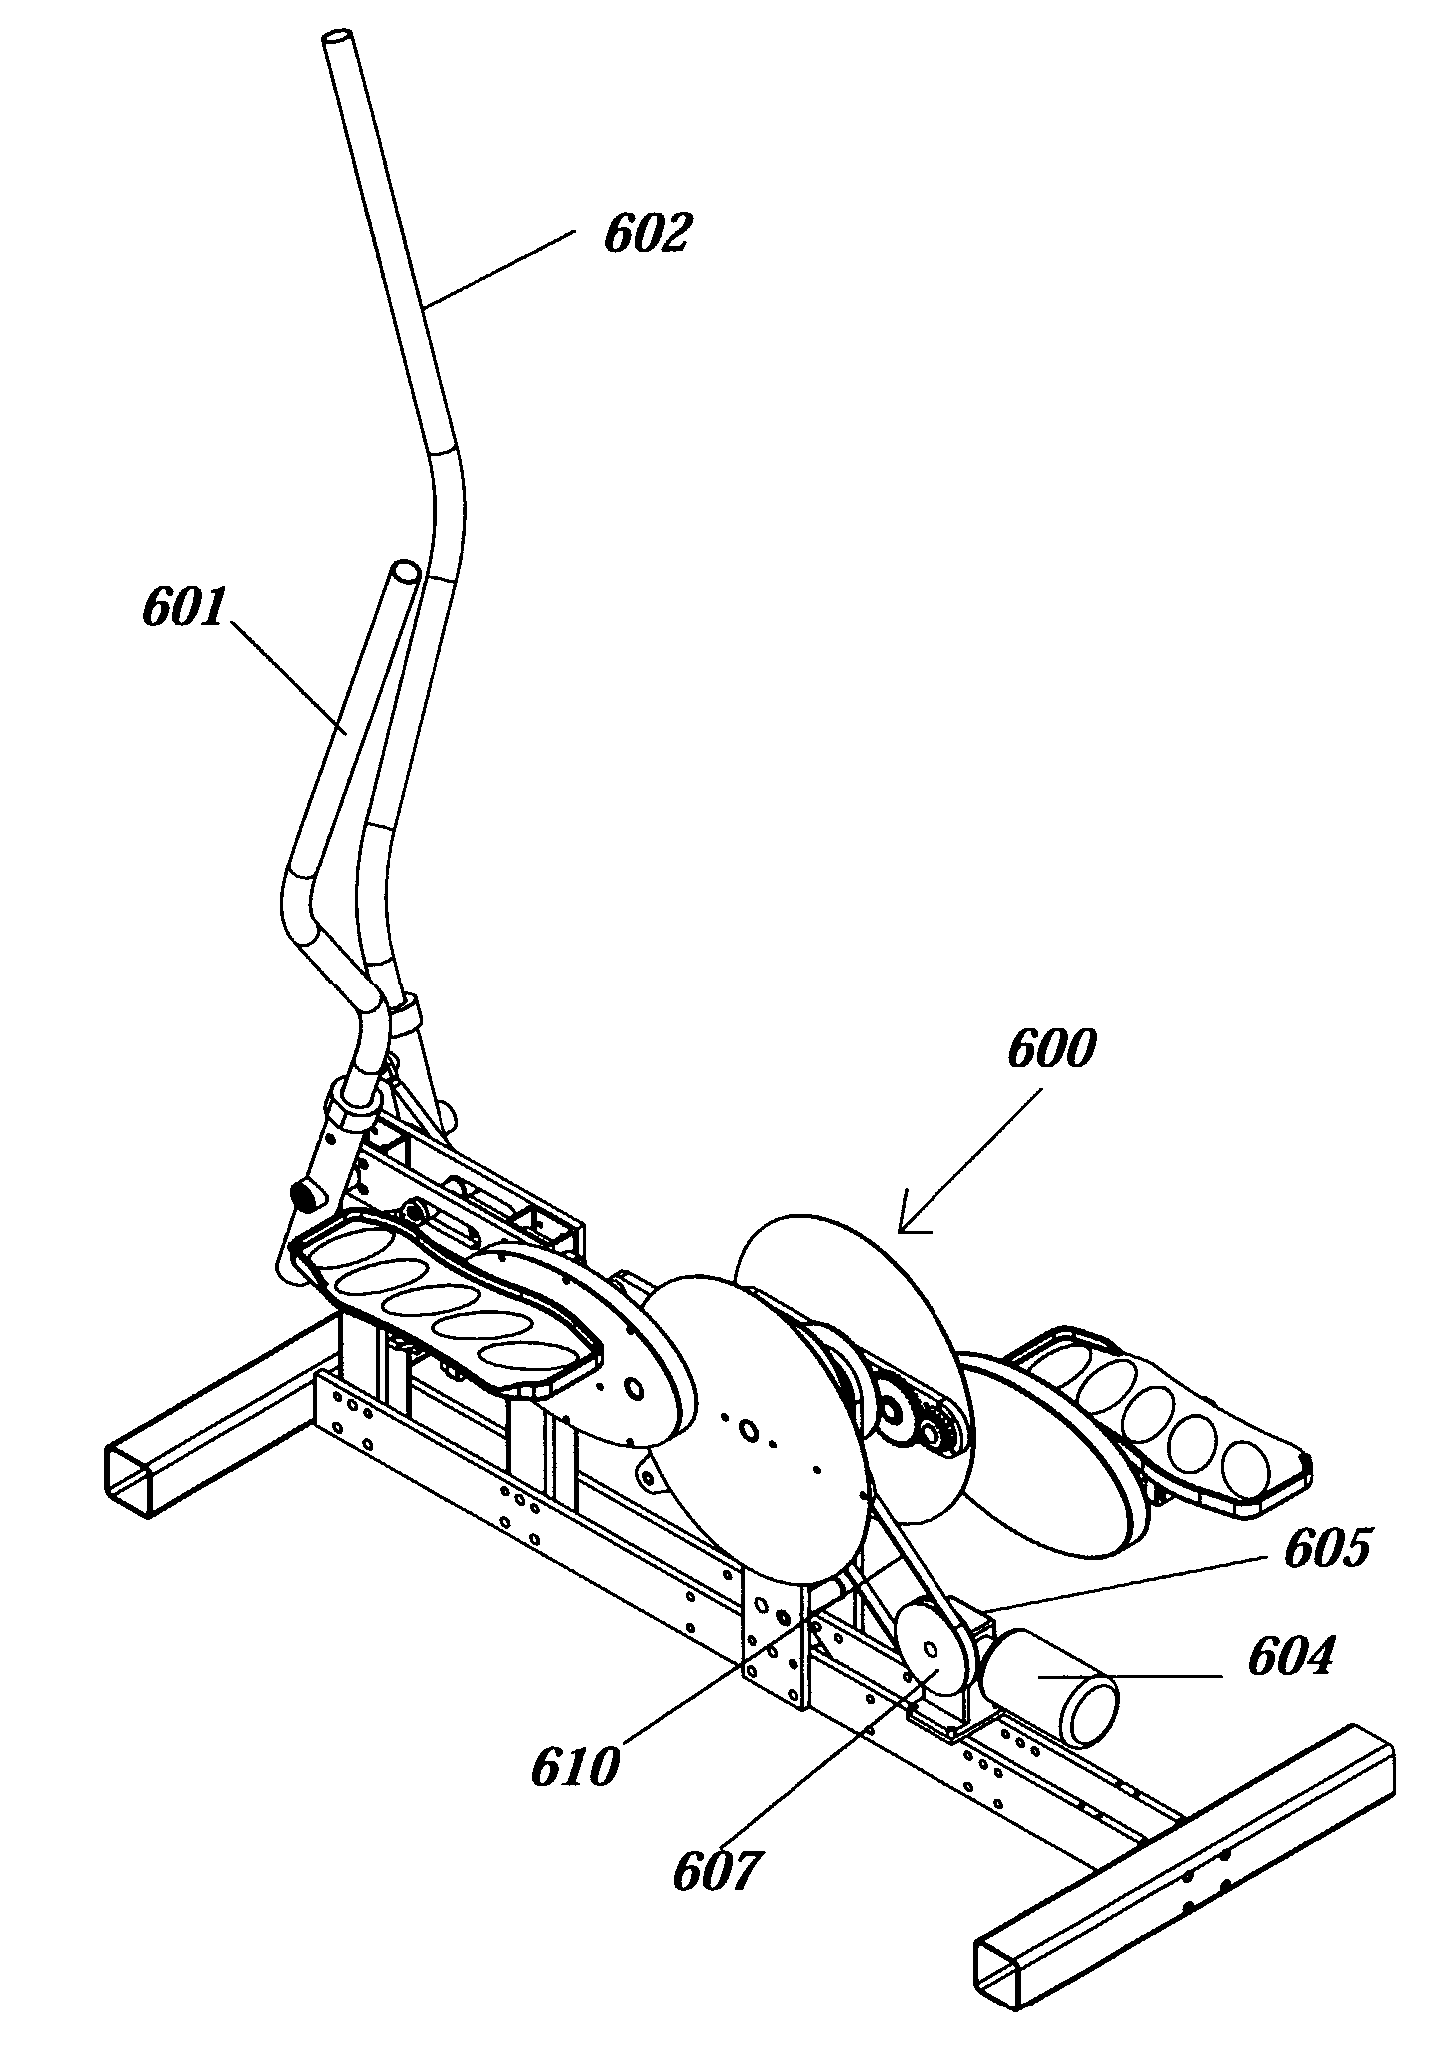 Apparatus for Physical Exercise, and a Crank Device and Foot Supporting Platforms for Use With Such Apparatus